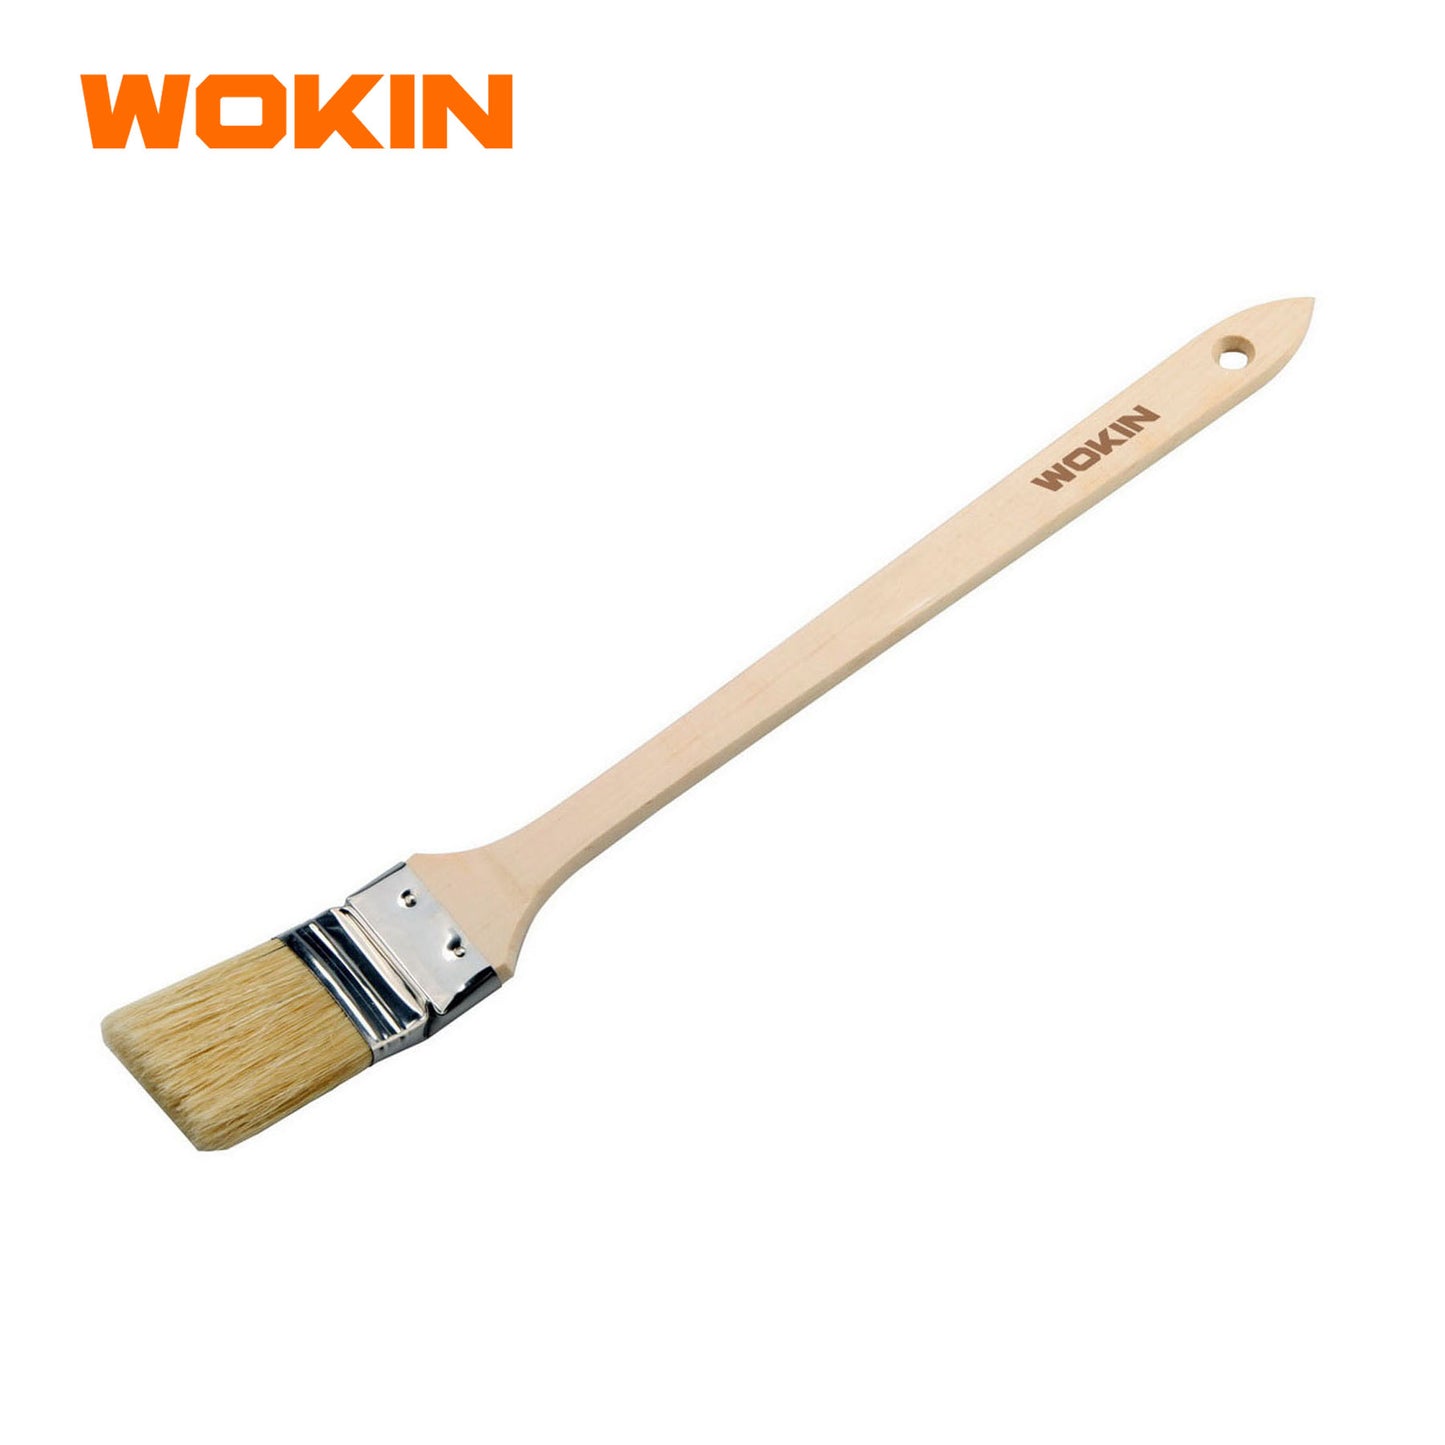 Wokin 1 Inch Curved Paint Brush